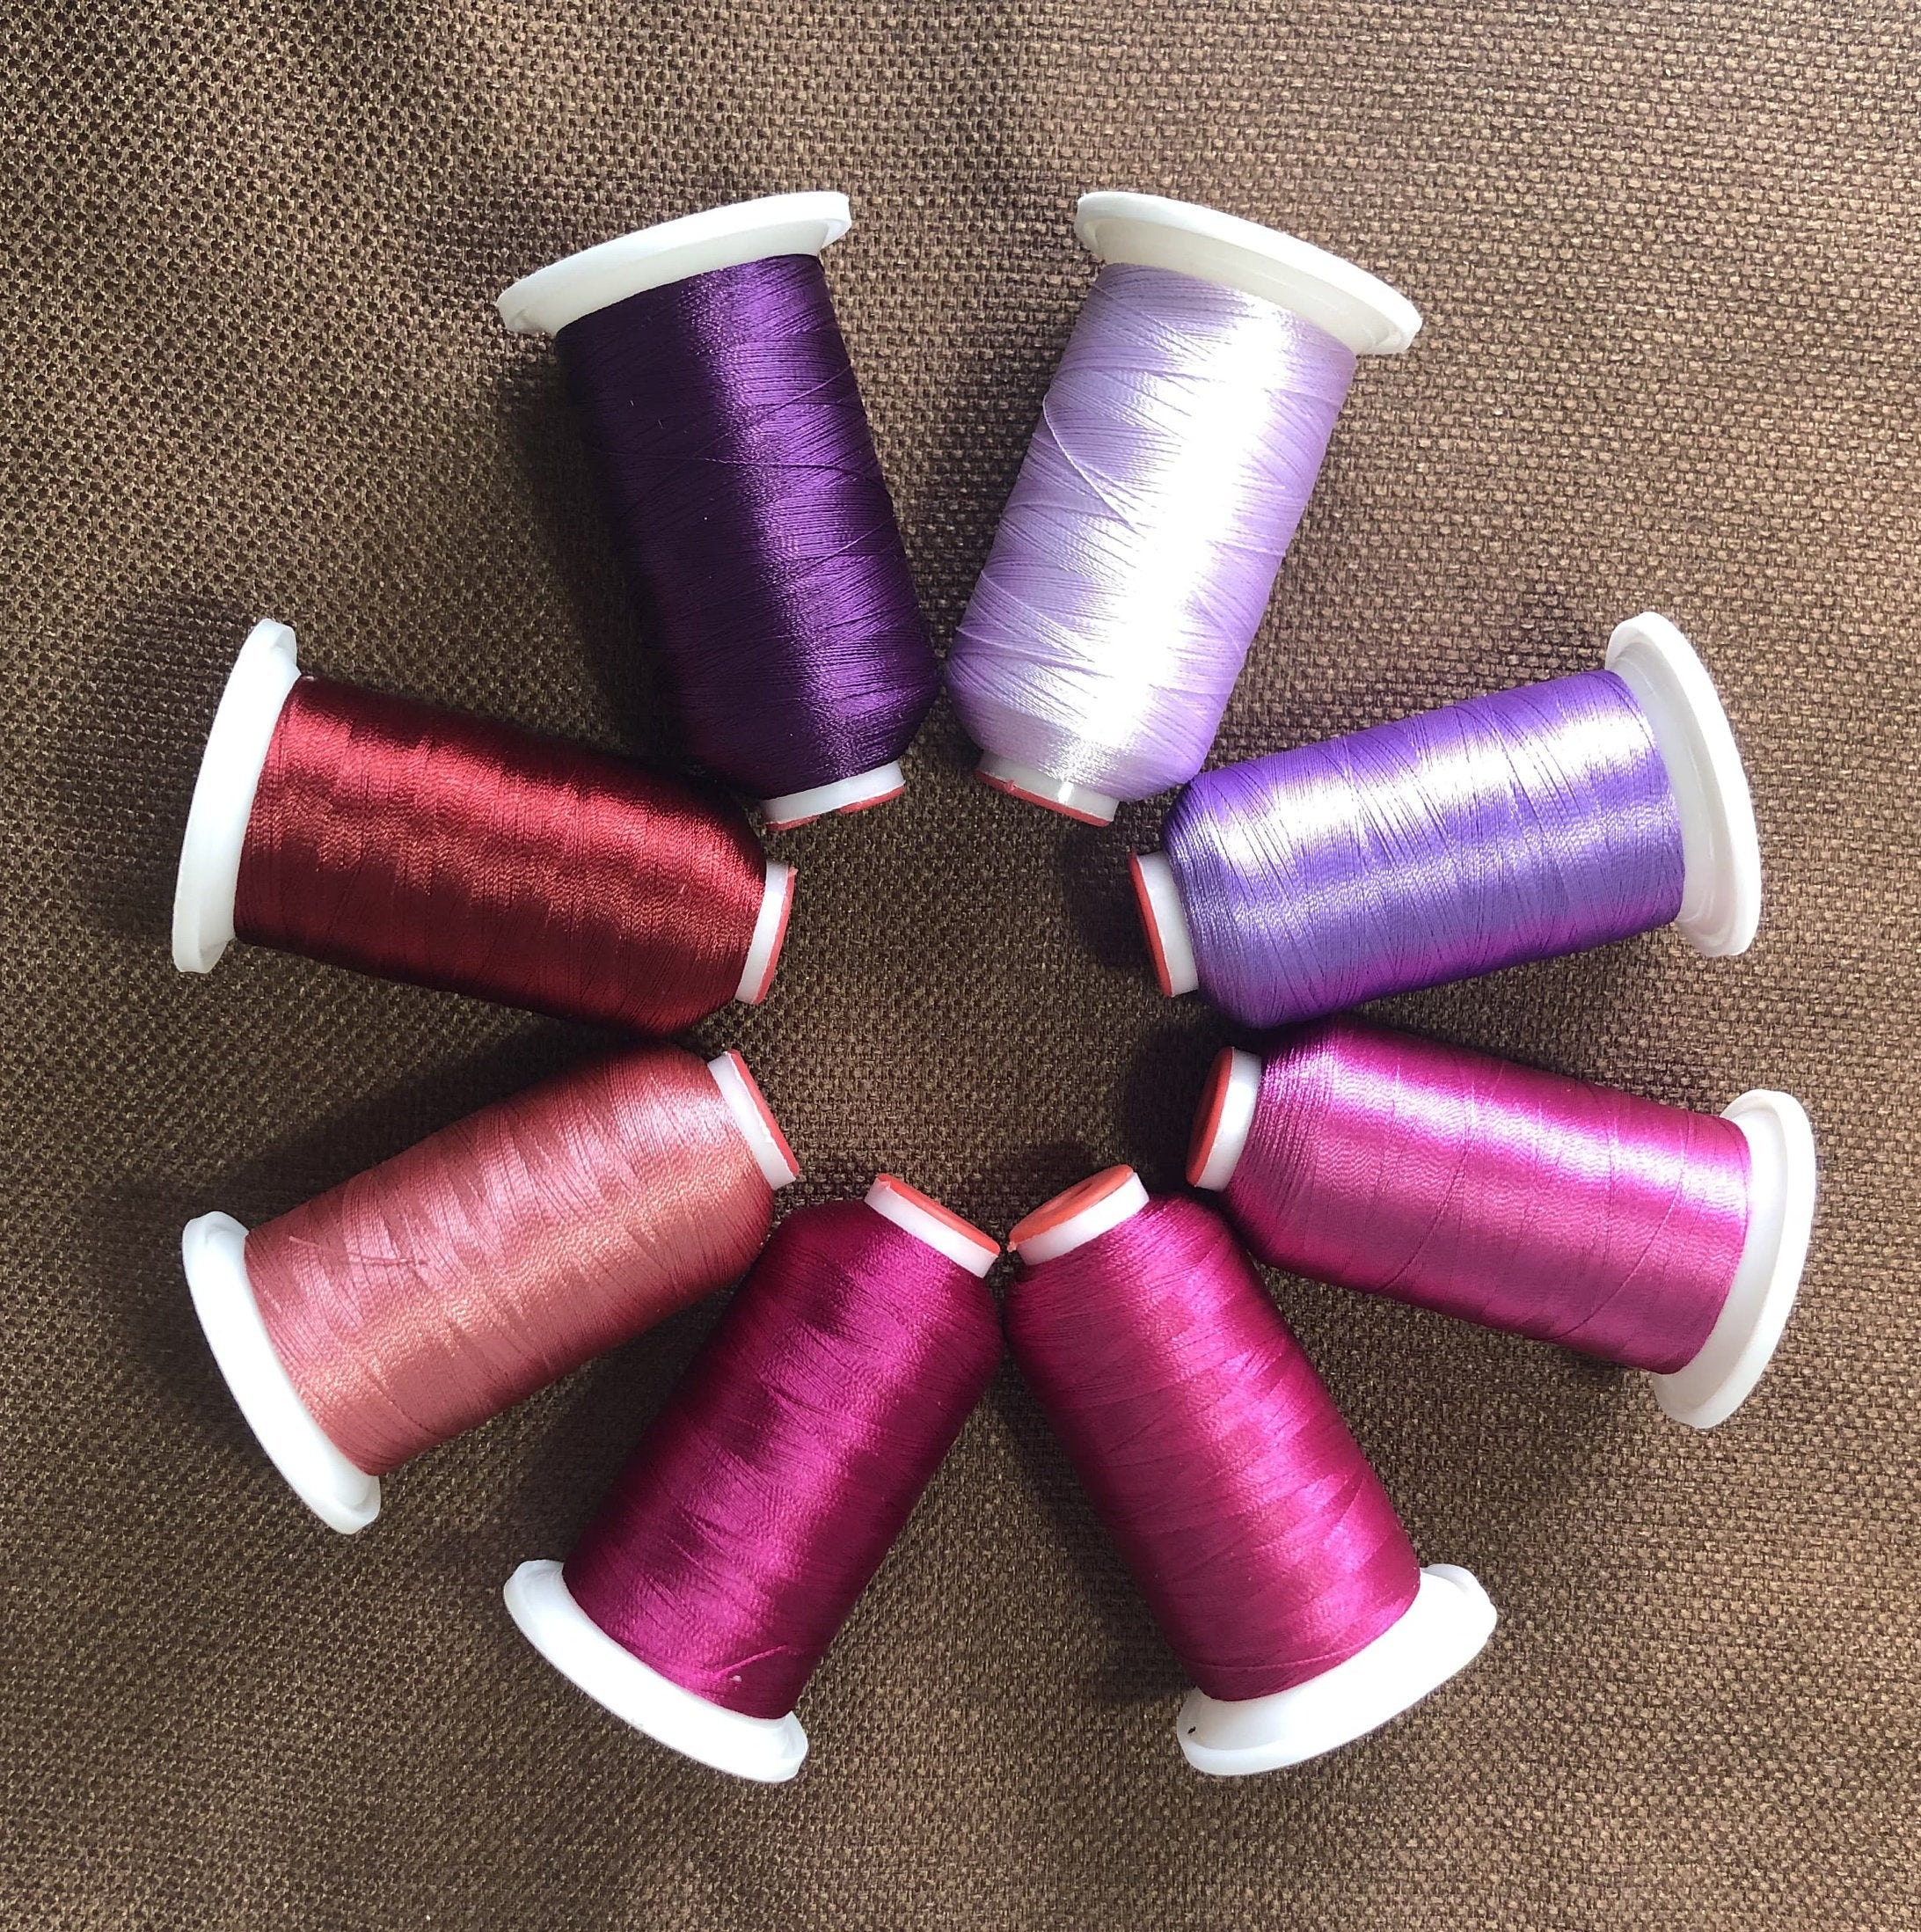 Threadart Variegated Polyester Embroidery Thread - 40wt - 1000M - 25 Colors Available - No. 9 - Violets, Purple